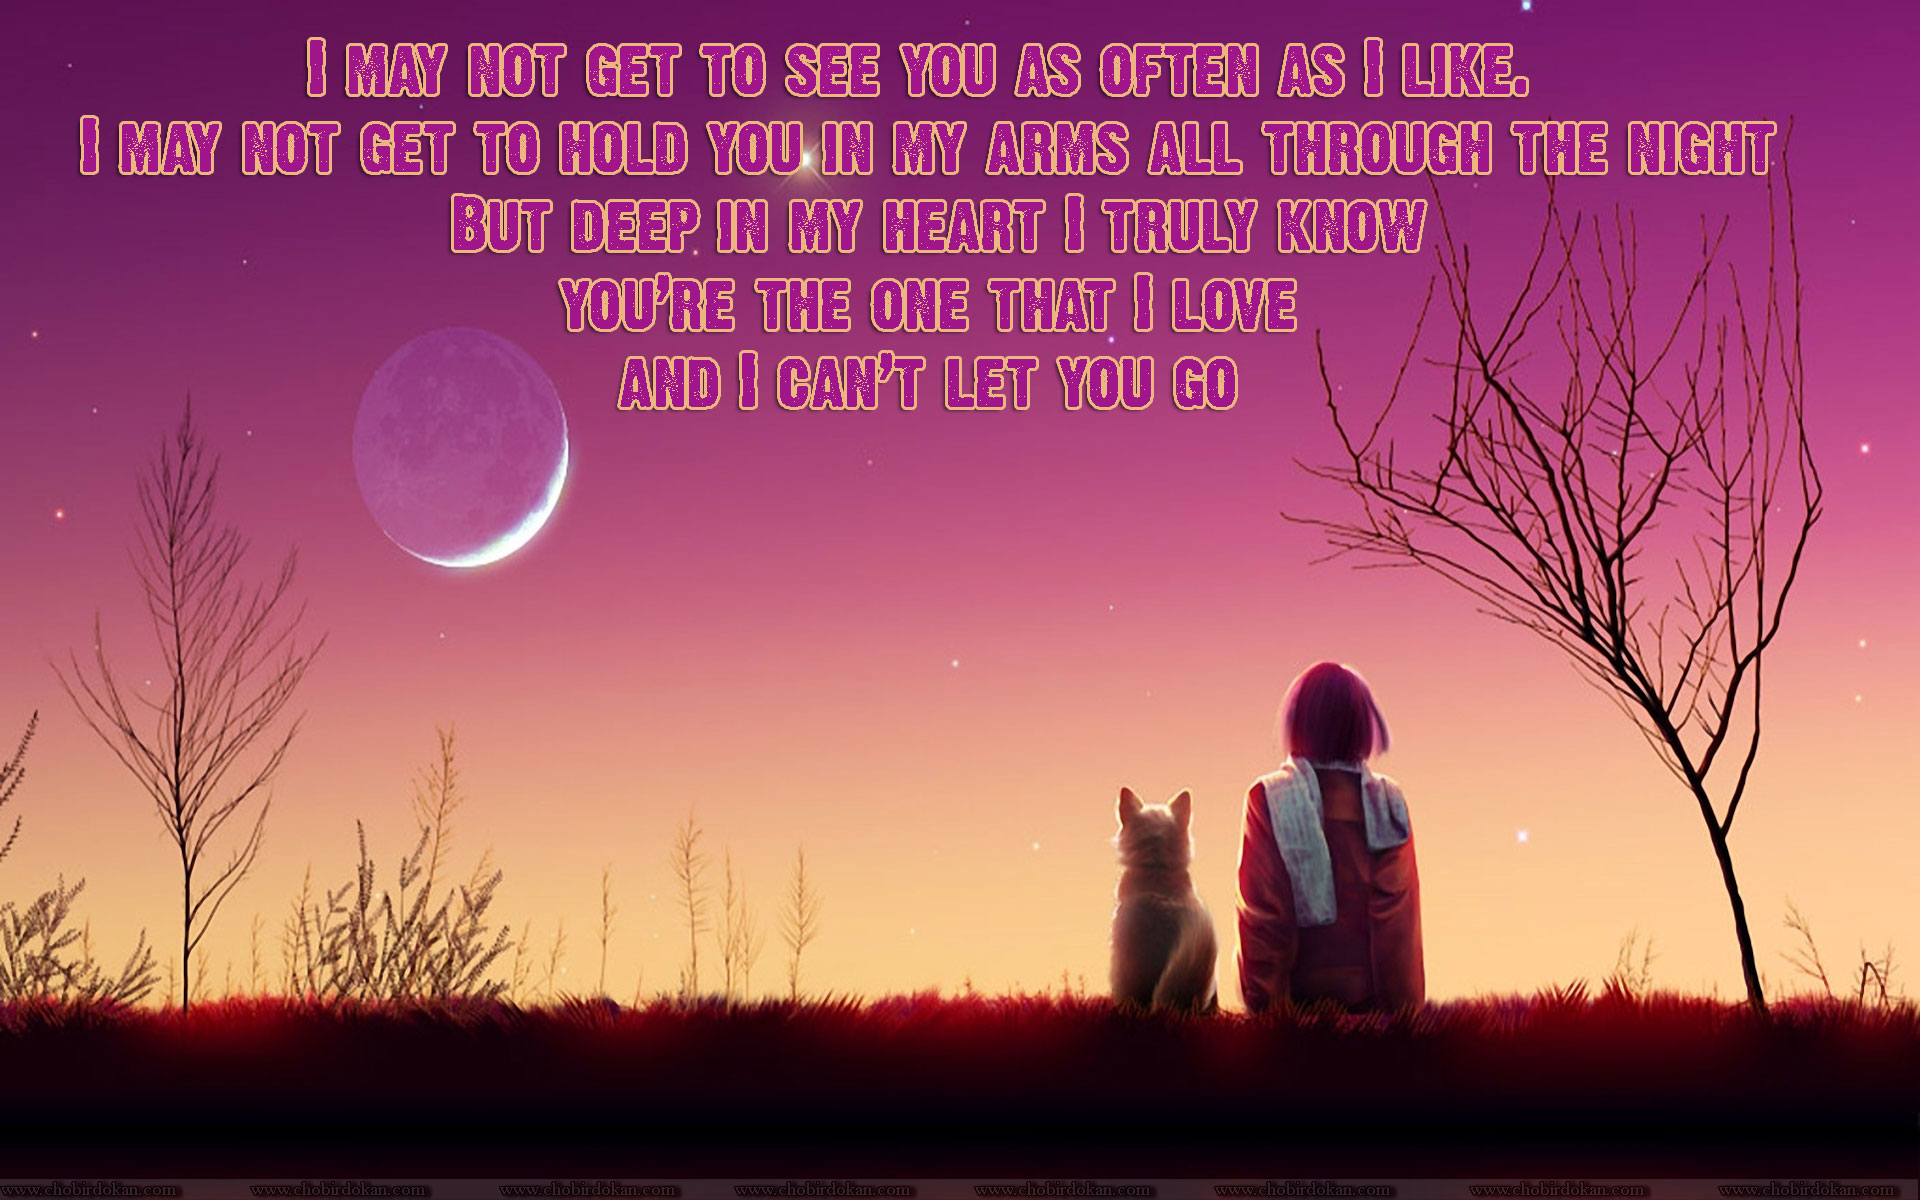 Quotes About Long Distance Relationships - True Friends Are Blessings - HD Wallpaper 